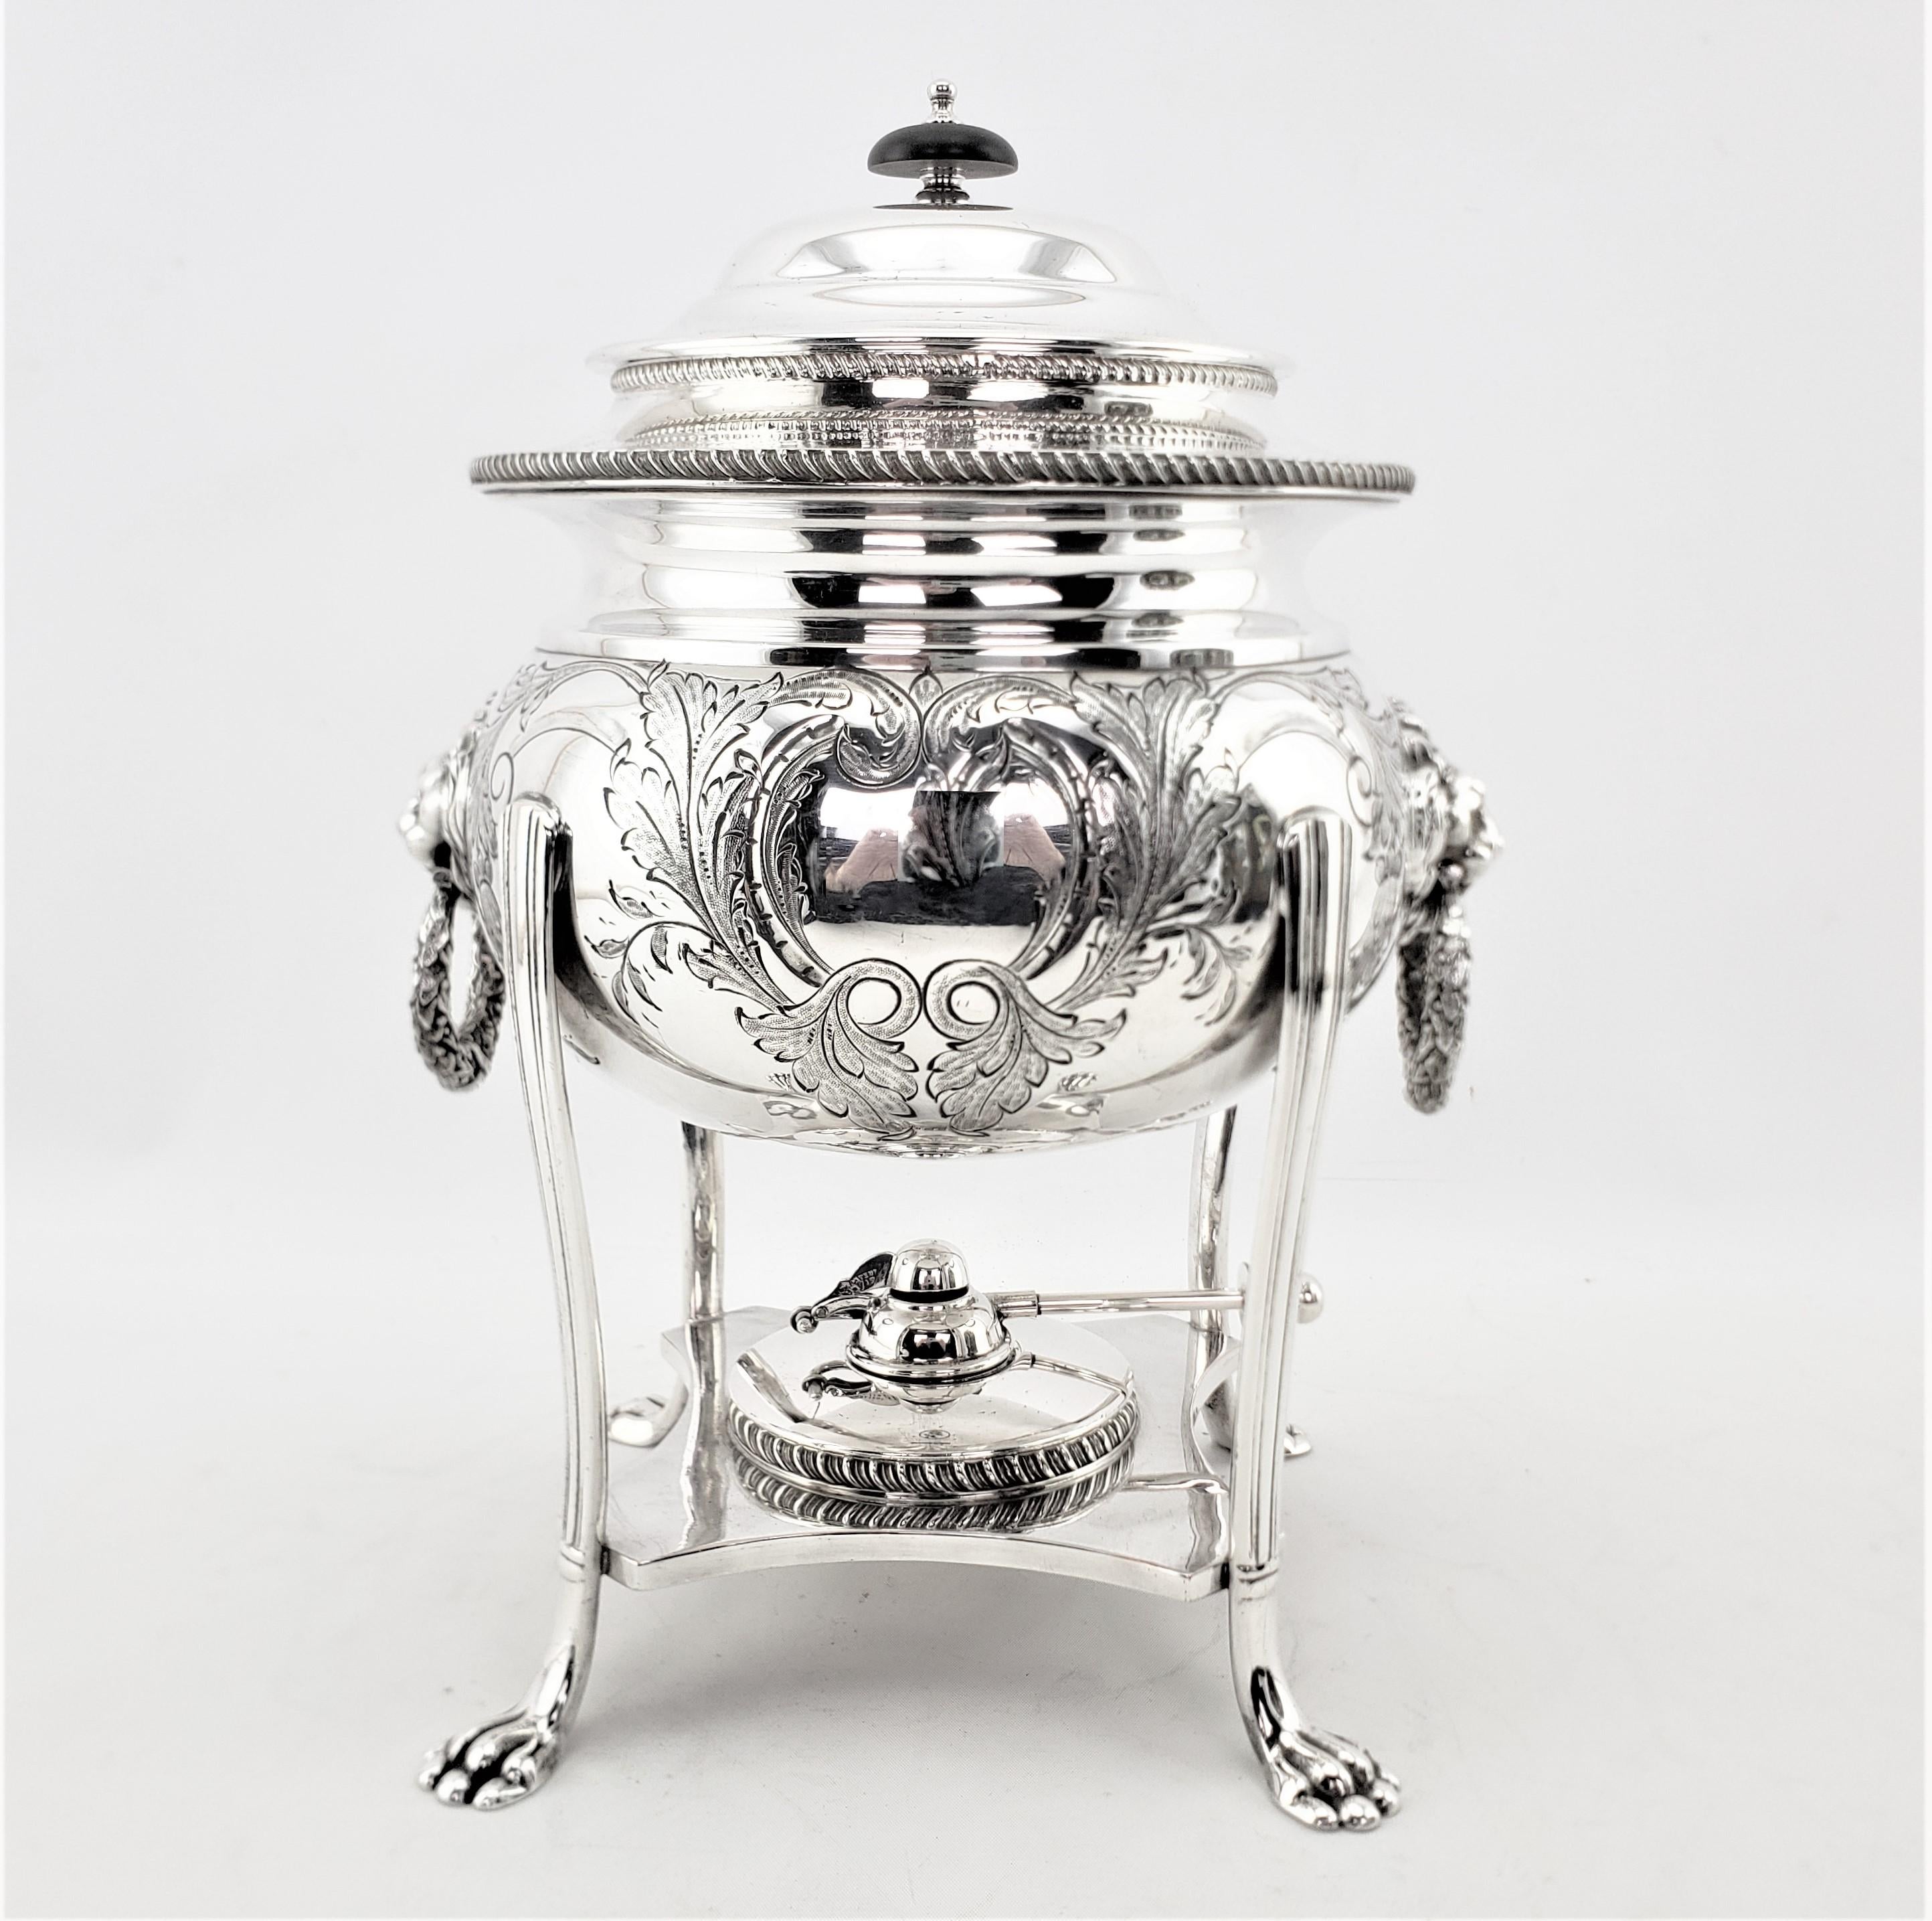 Antique English Silver Plated Tea or Hot Water Urn with Lion Mounts & Engraving 1